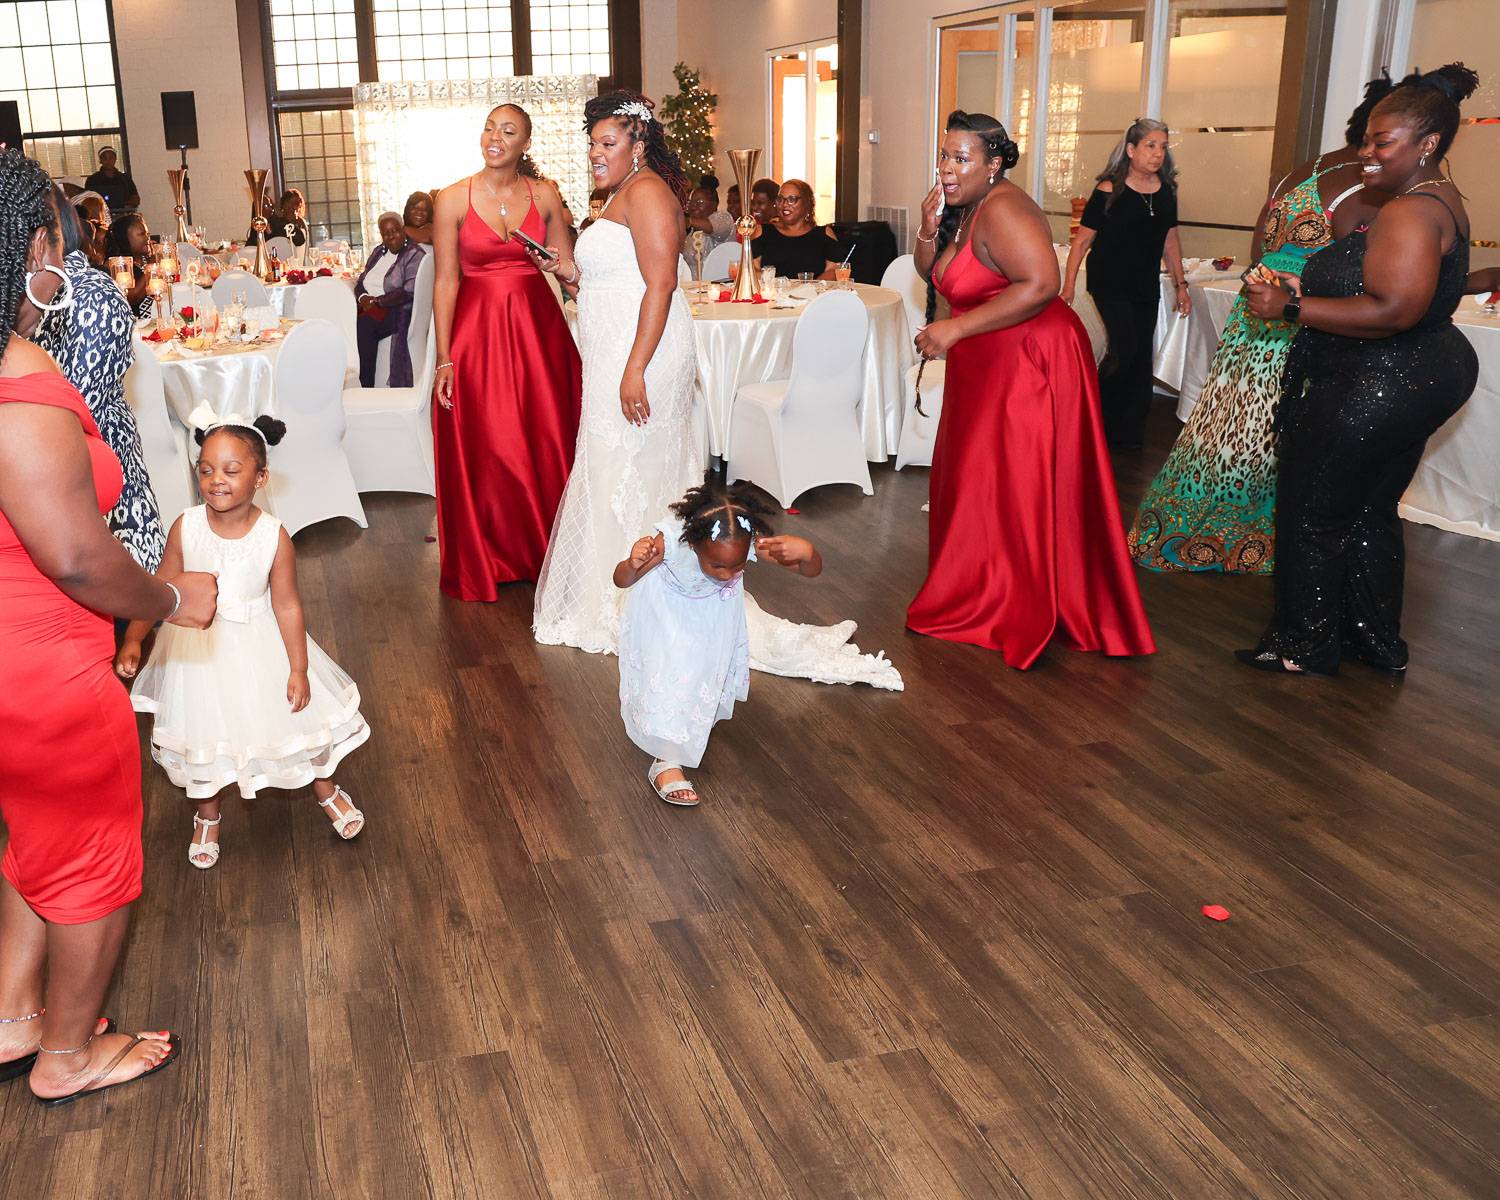 Girls dancing with the bridesmaids